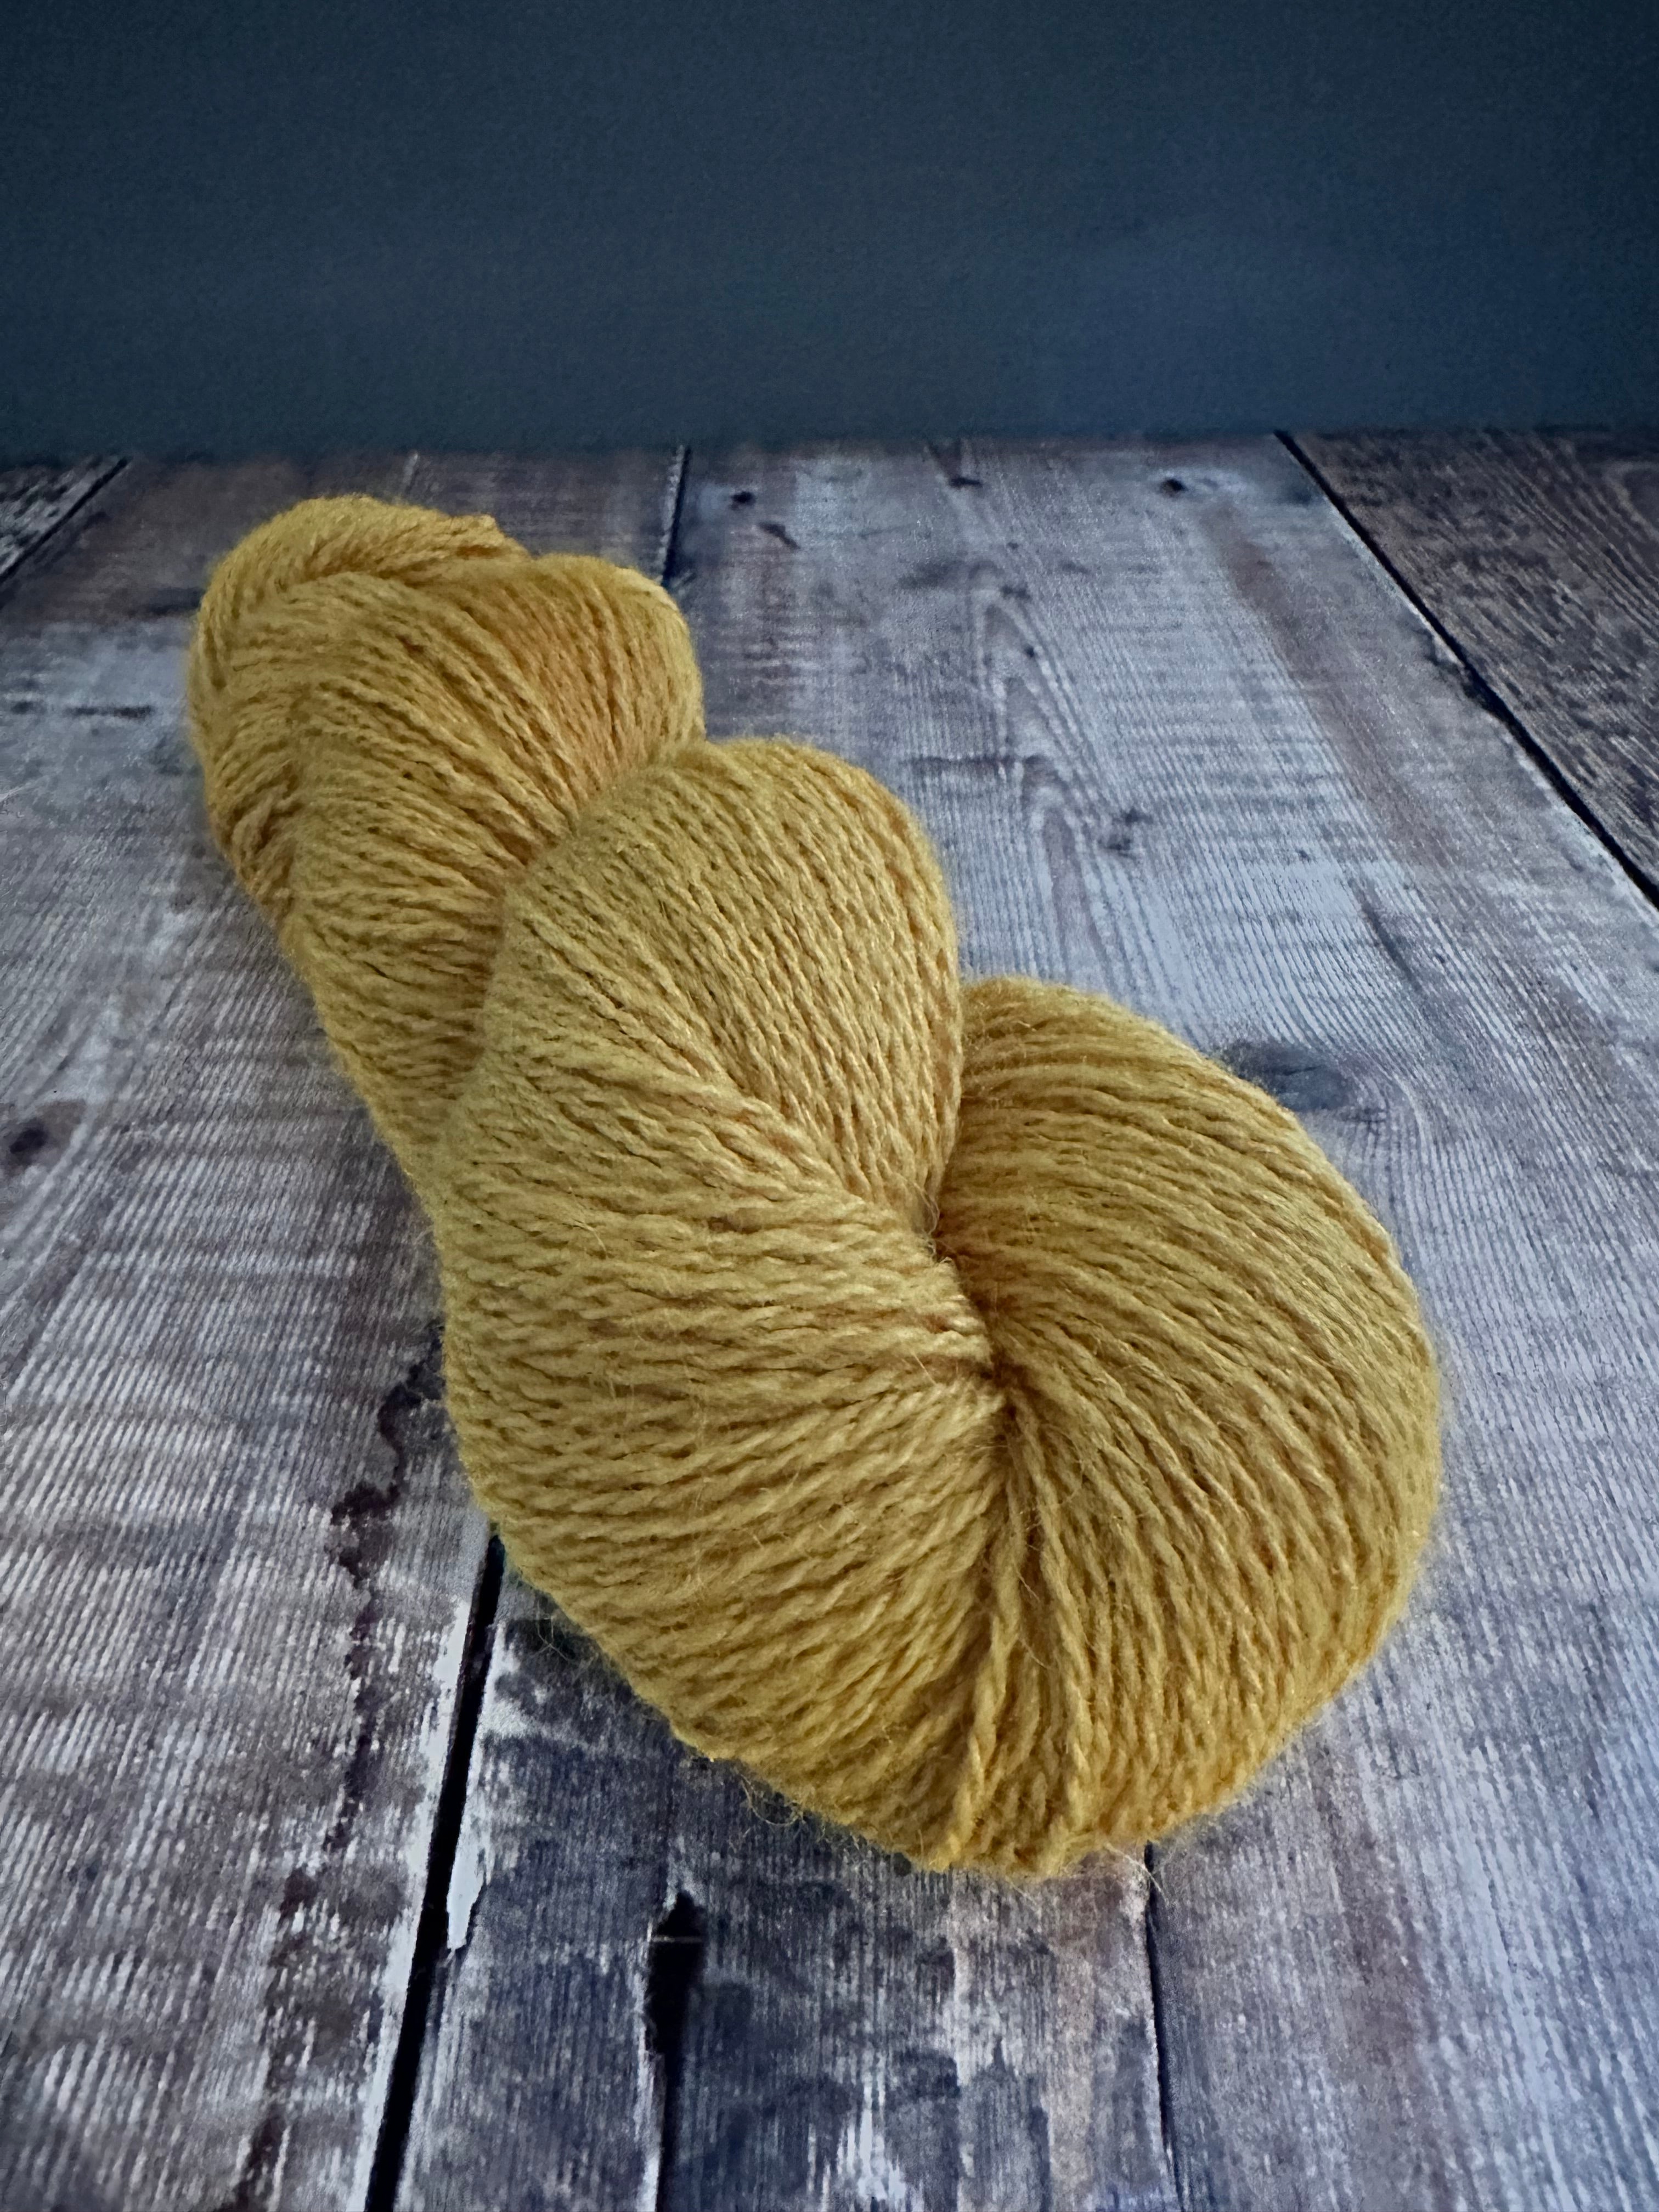 Hand Dyed 70% Cheviot & 30% Soy 4ply yarn 100g Skein